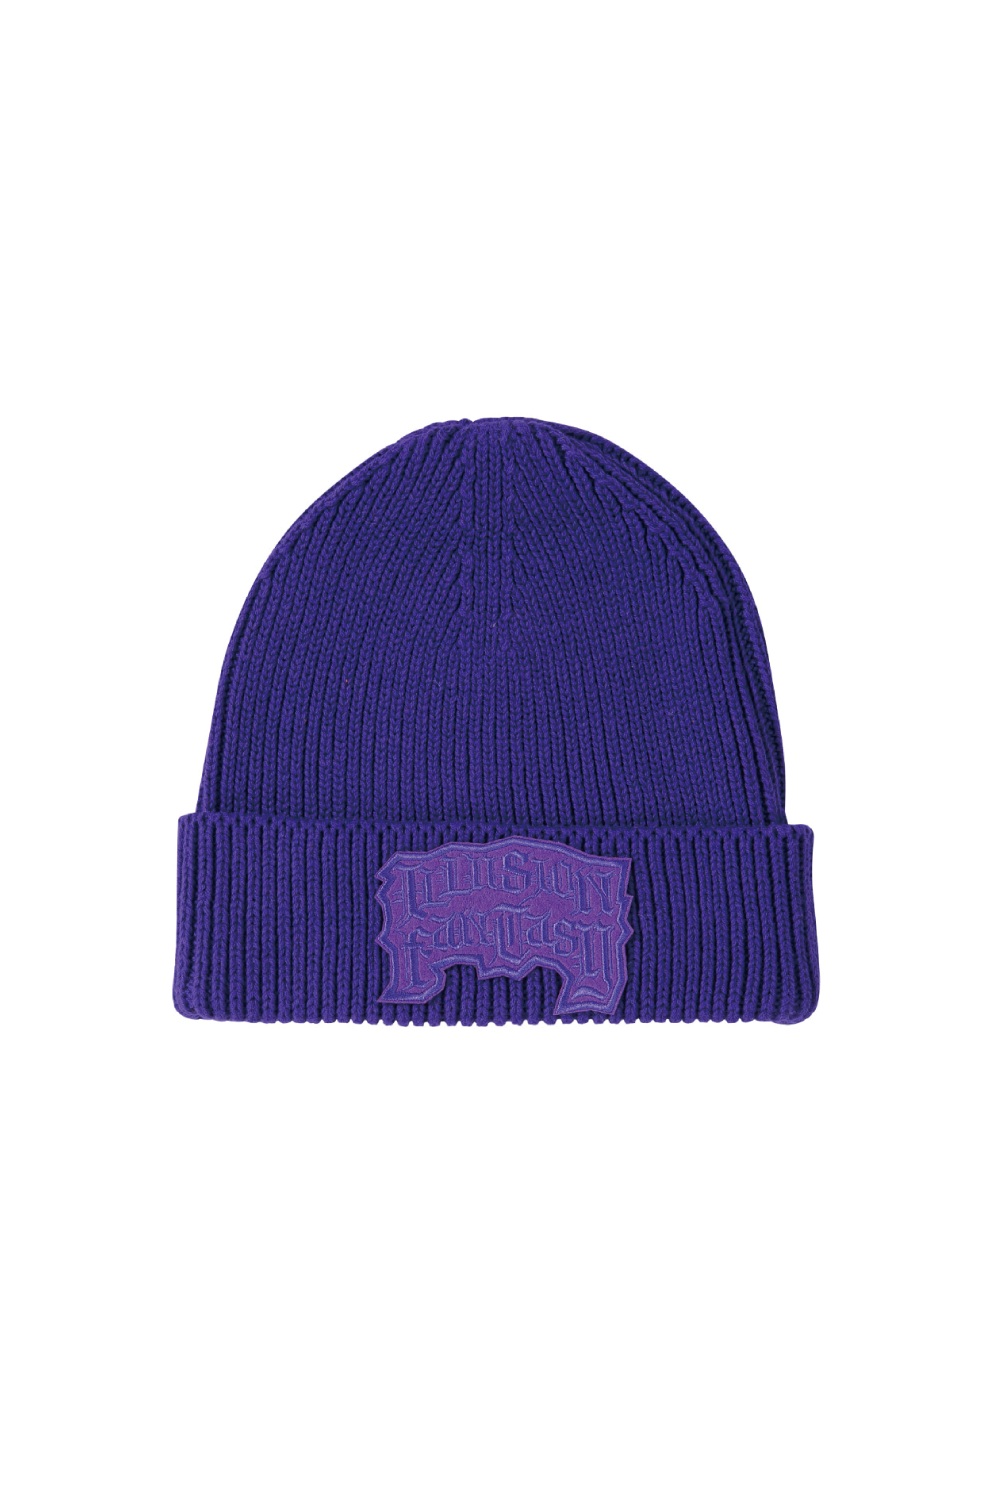 ILLUSION FANTASY PATCHED BEANIE (PURPLE)GRAFFITIONMIND